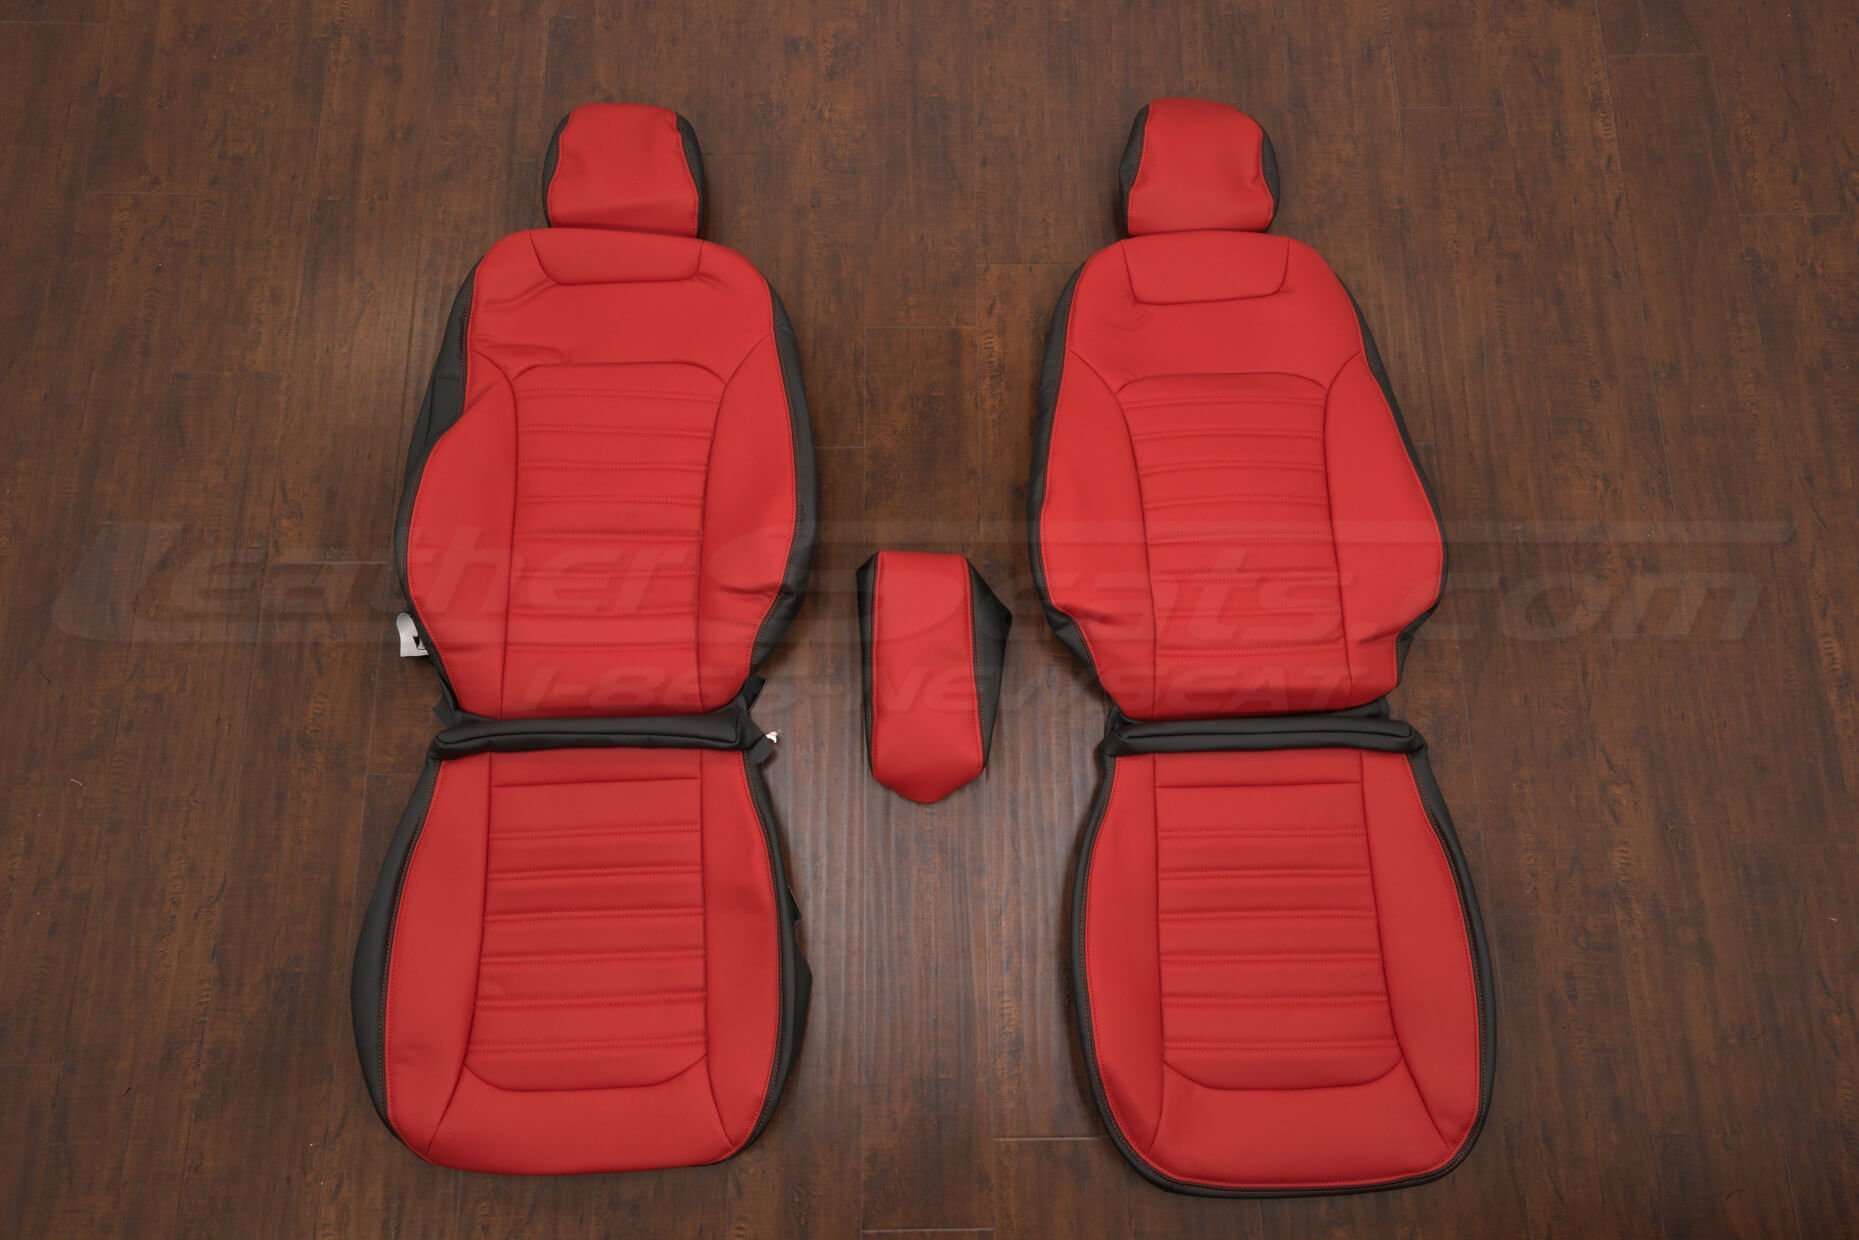 Ford Fusion Leather Kit - Black & Bright Red - Front seat upholstery w/ console